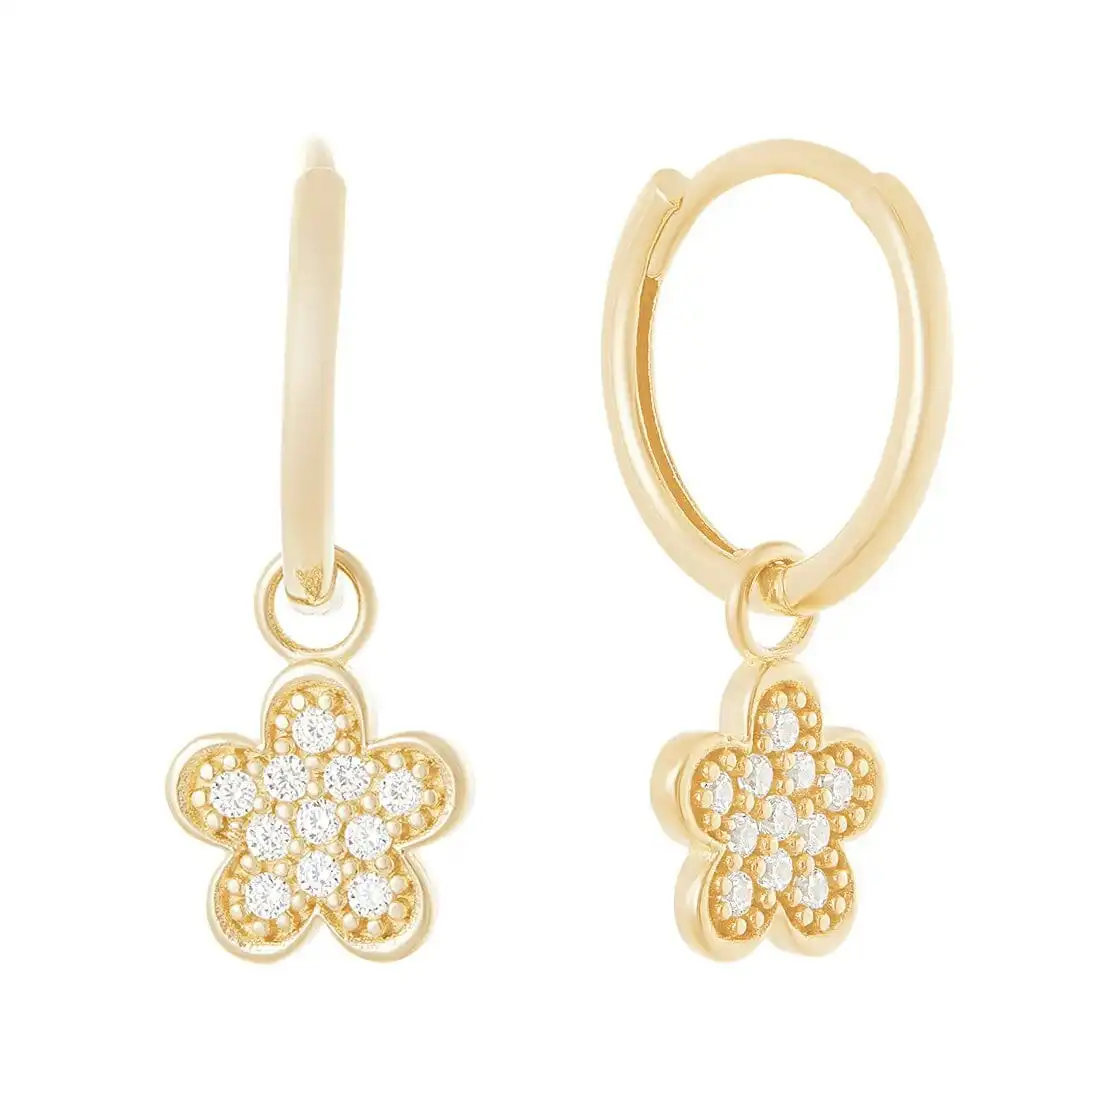 9ct Yellow Gold Pave Flower Charms Hoop Earrings with Cubic Zirconia